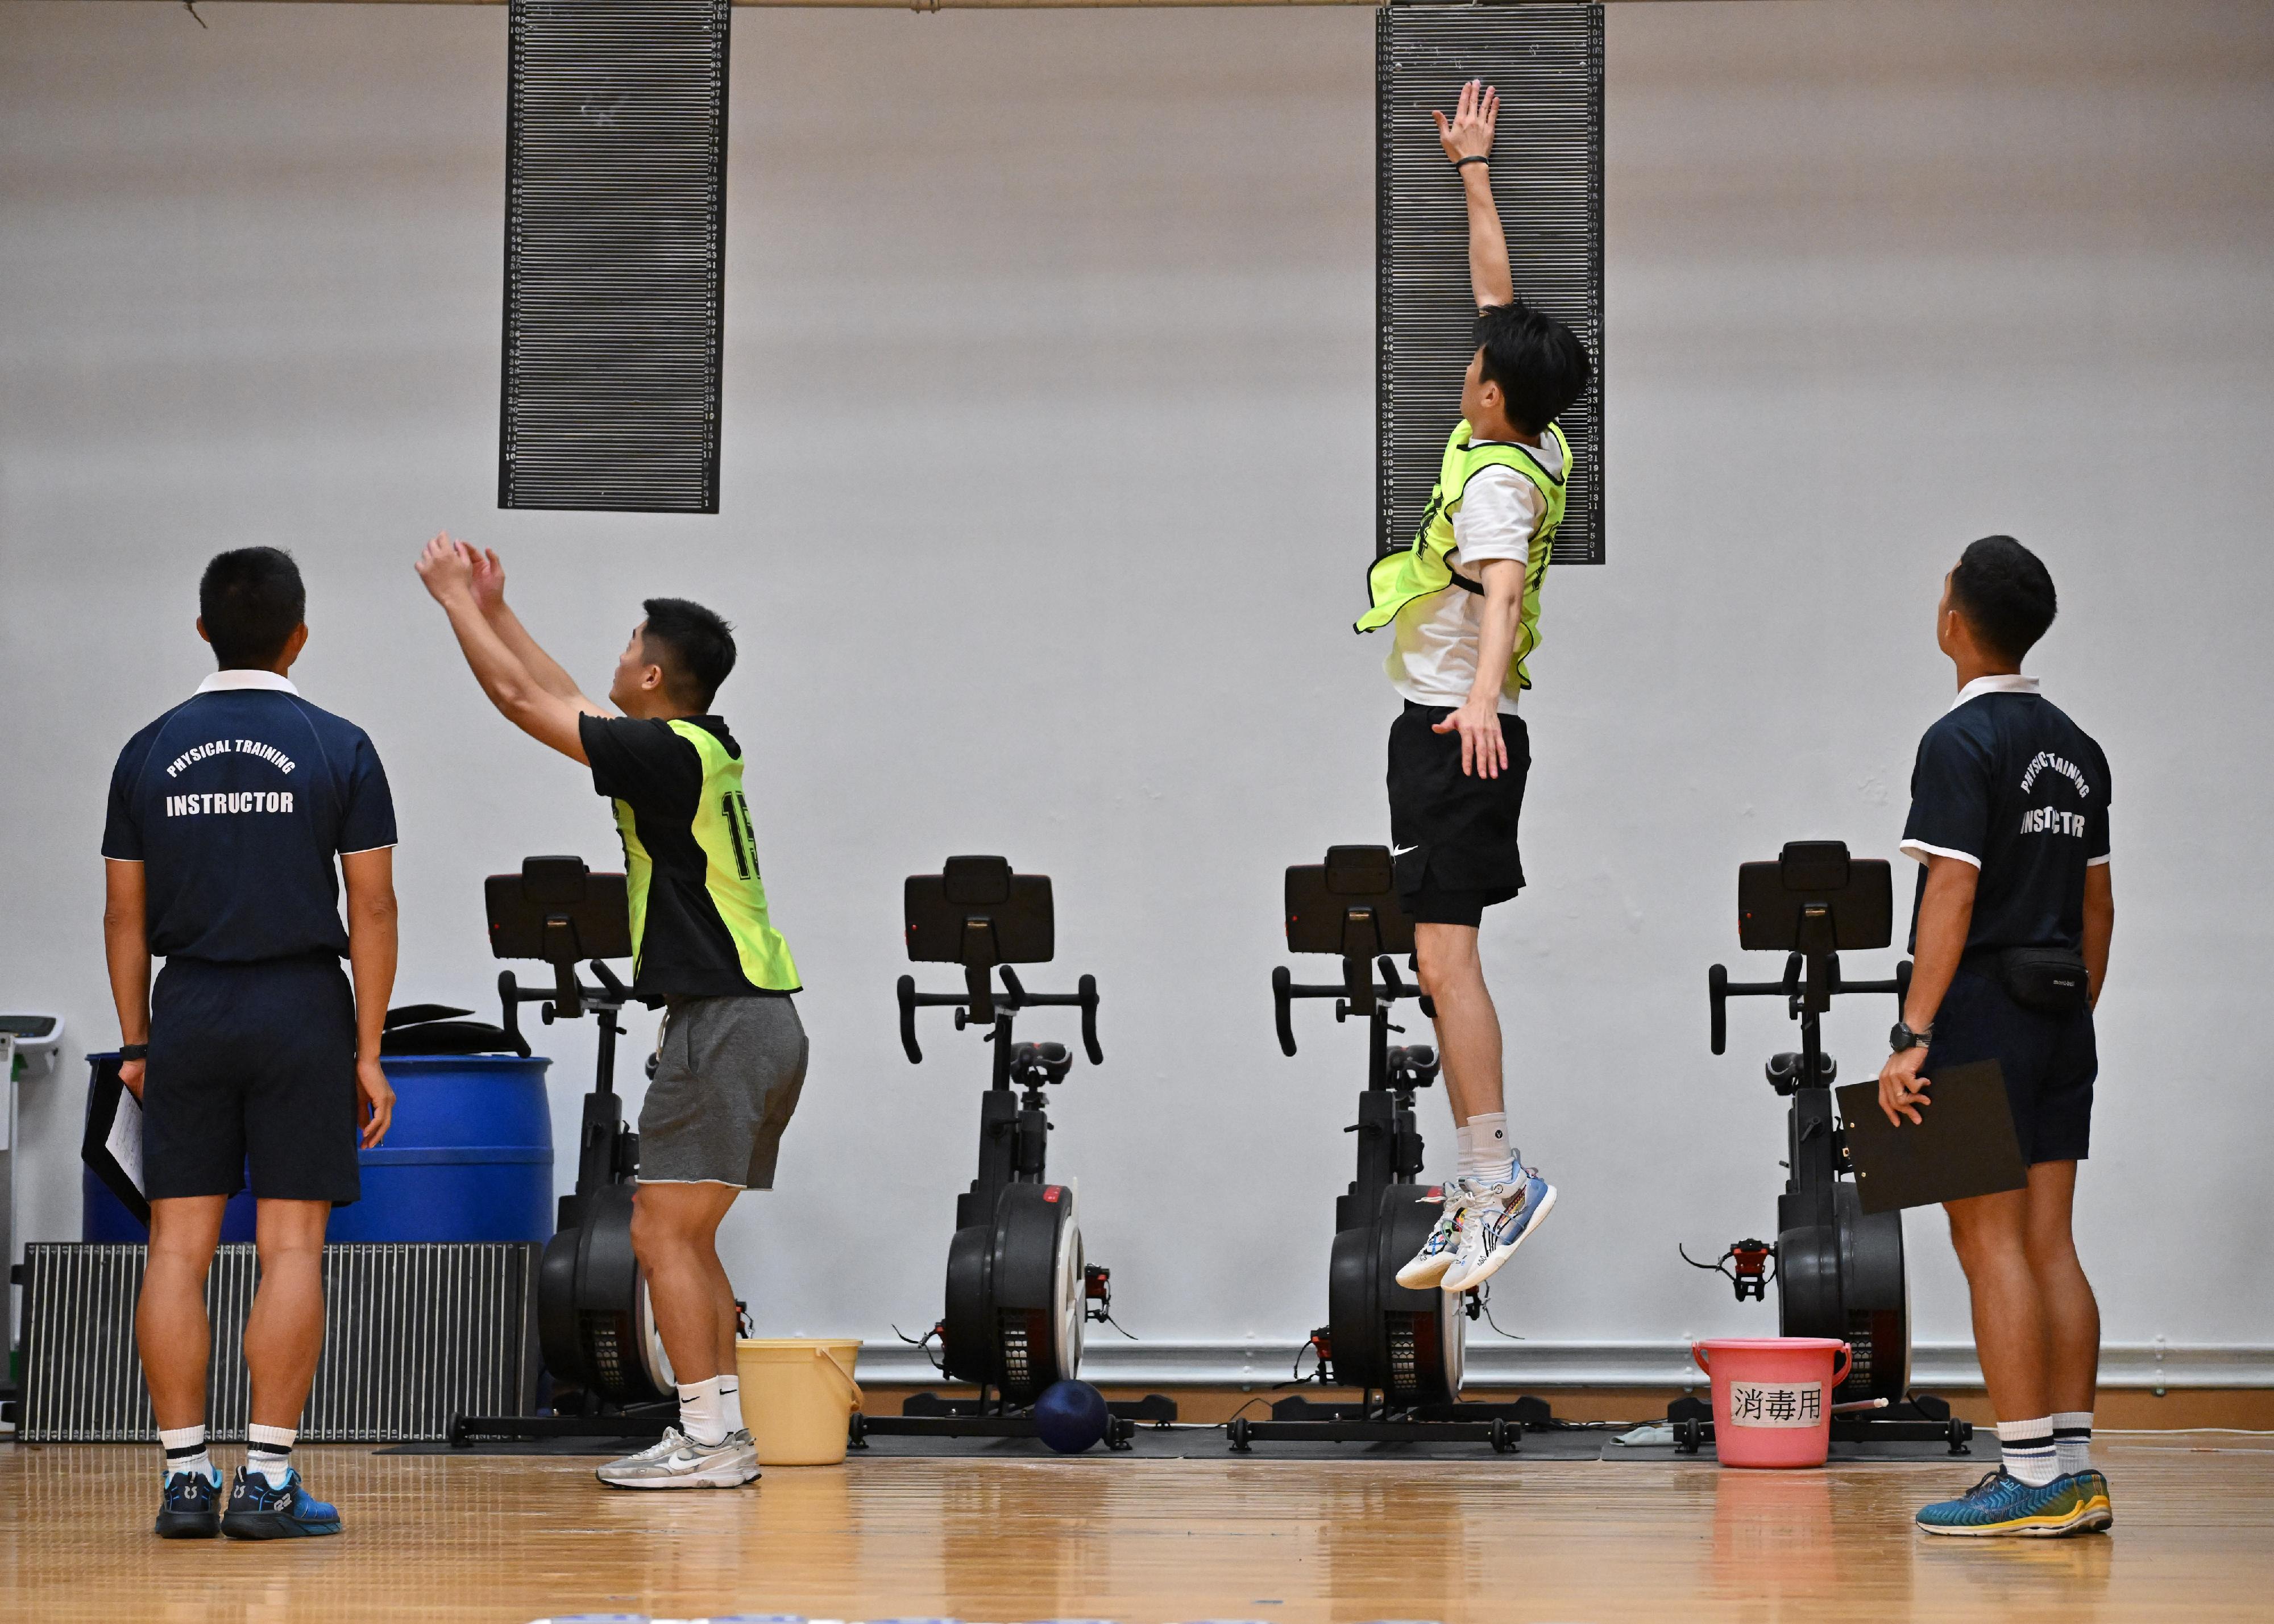 The Hong Kong Police Force today (June 18) organised the Police Recruitment Experience and Assessment Day at the Hong Kong Police College. Photo shows participants taking part in the vertical jump test during the physical fitness test workshop.